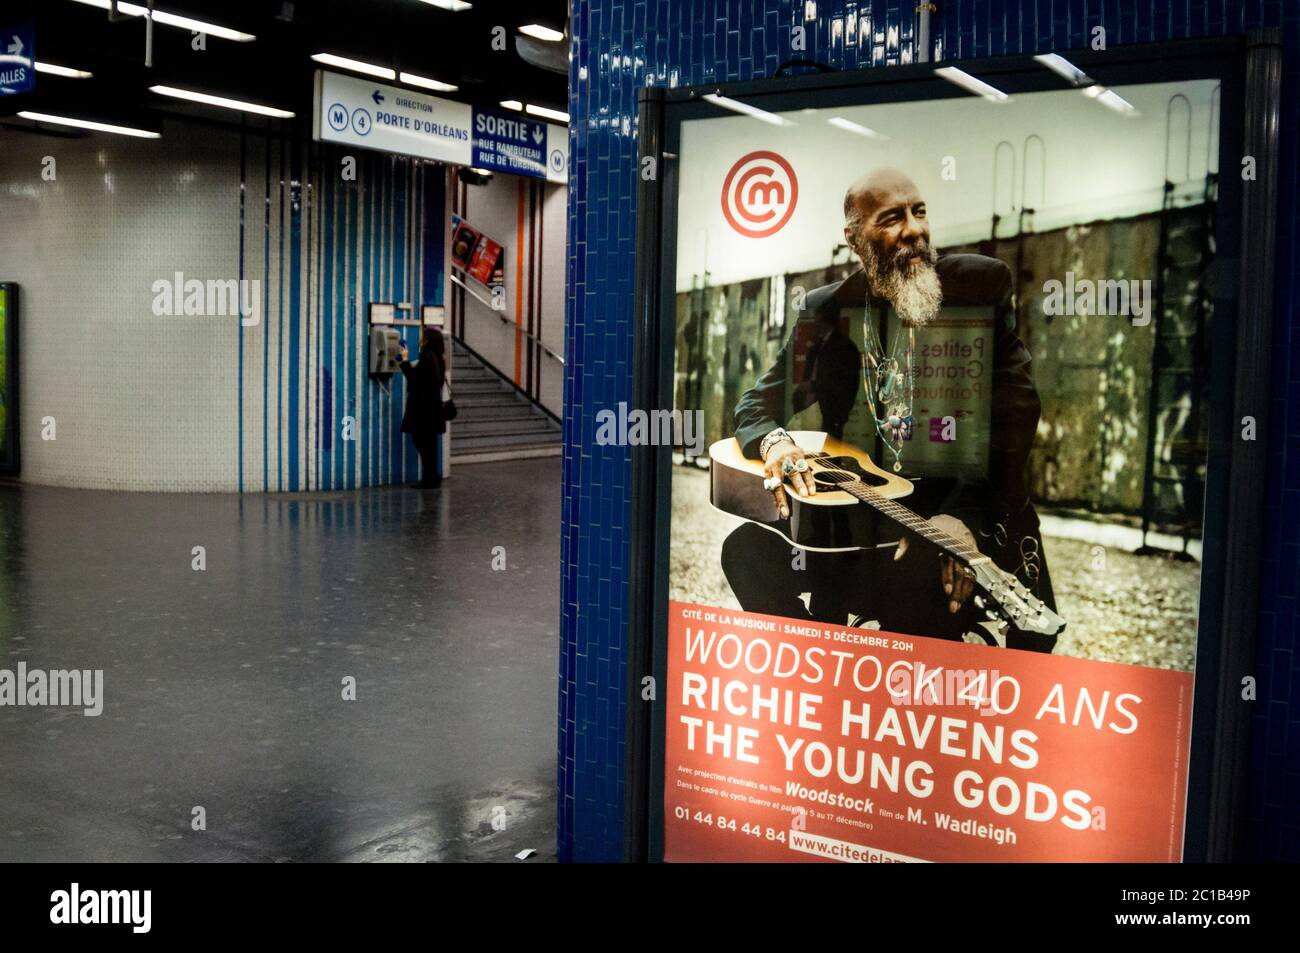 Poster for Richie Havens and the Young Gods, an icon of Woodstock, at the subway station in Paris, France. Stock Photo